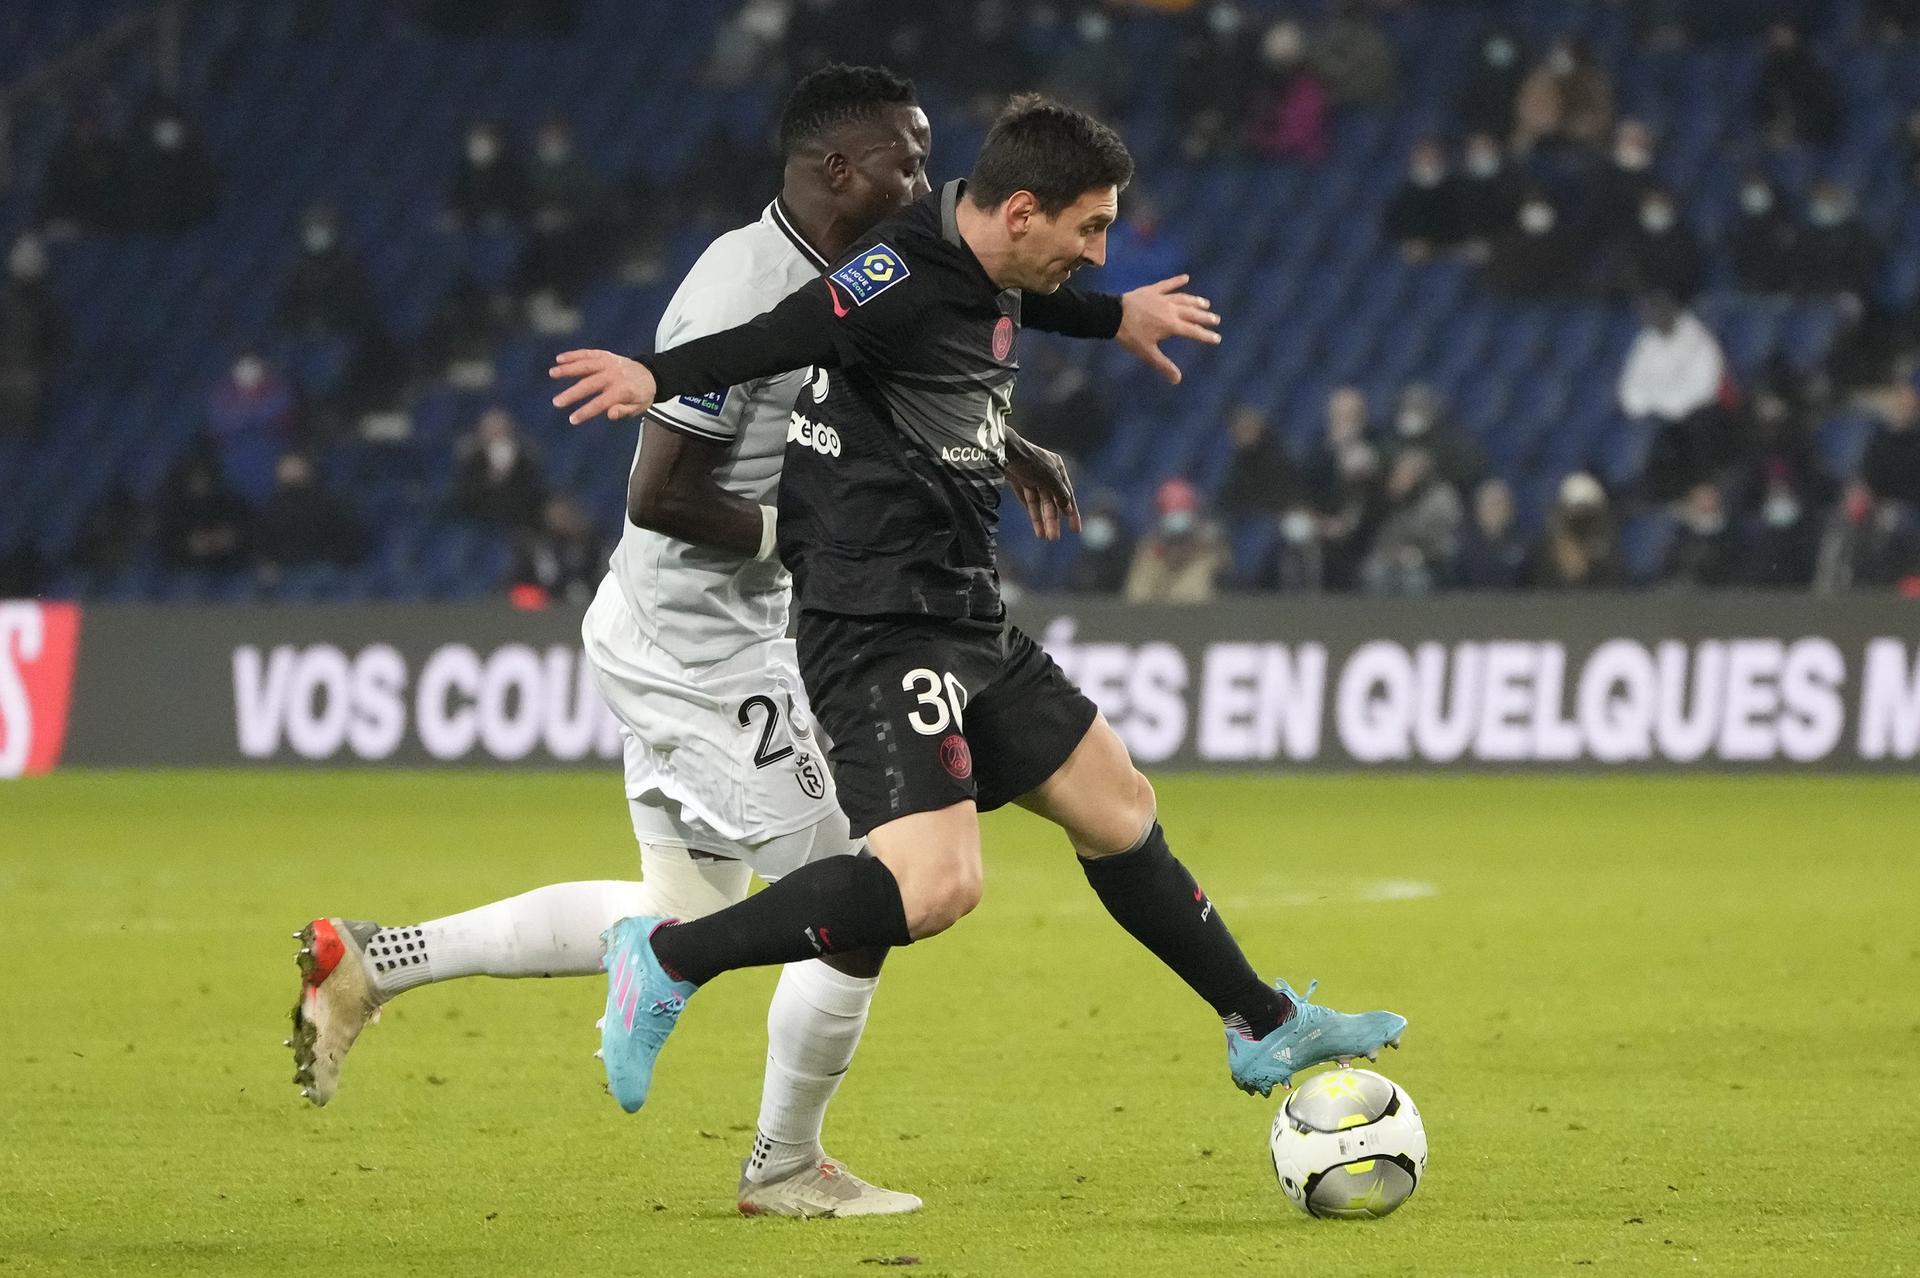 Auxerre vs. Reims Predictions, Picks and Betting Odds - Sunday, October 23, 2022